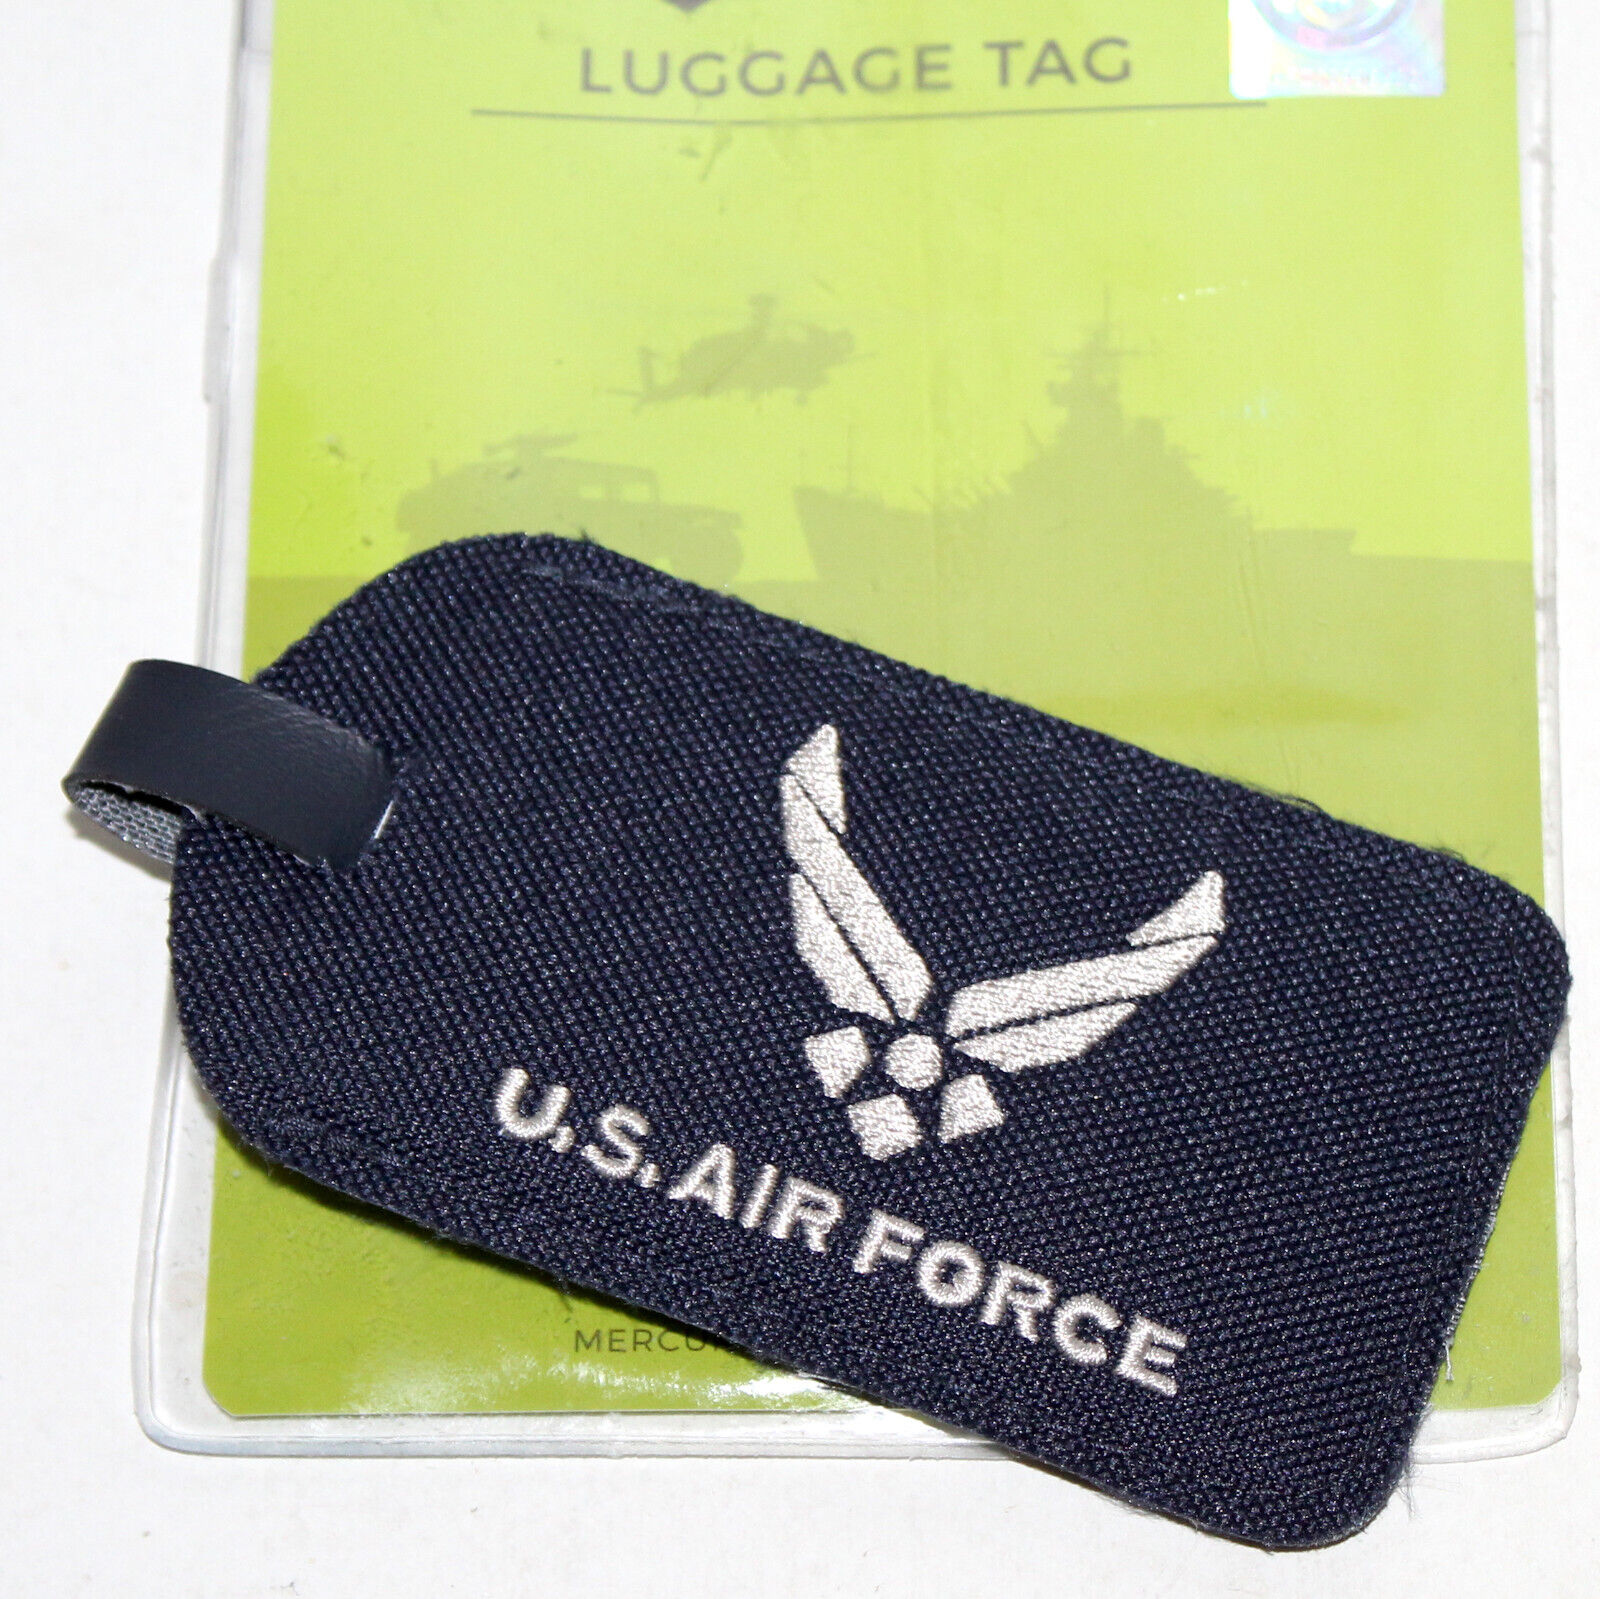 Mercury Luggage Tag USAF military Air Force Official tactical gear blue silver